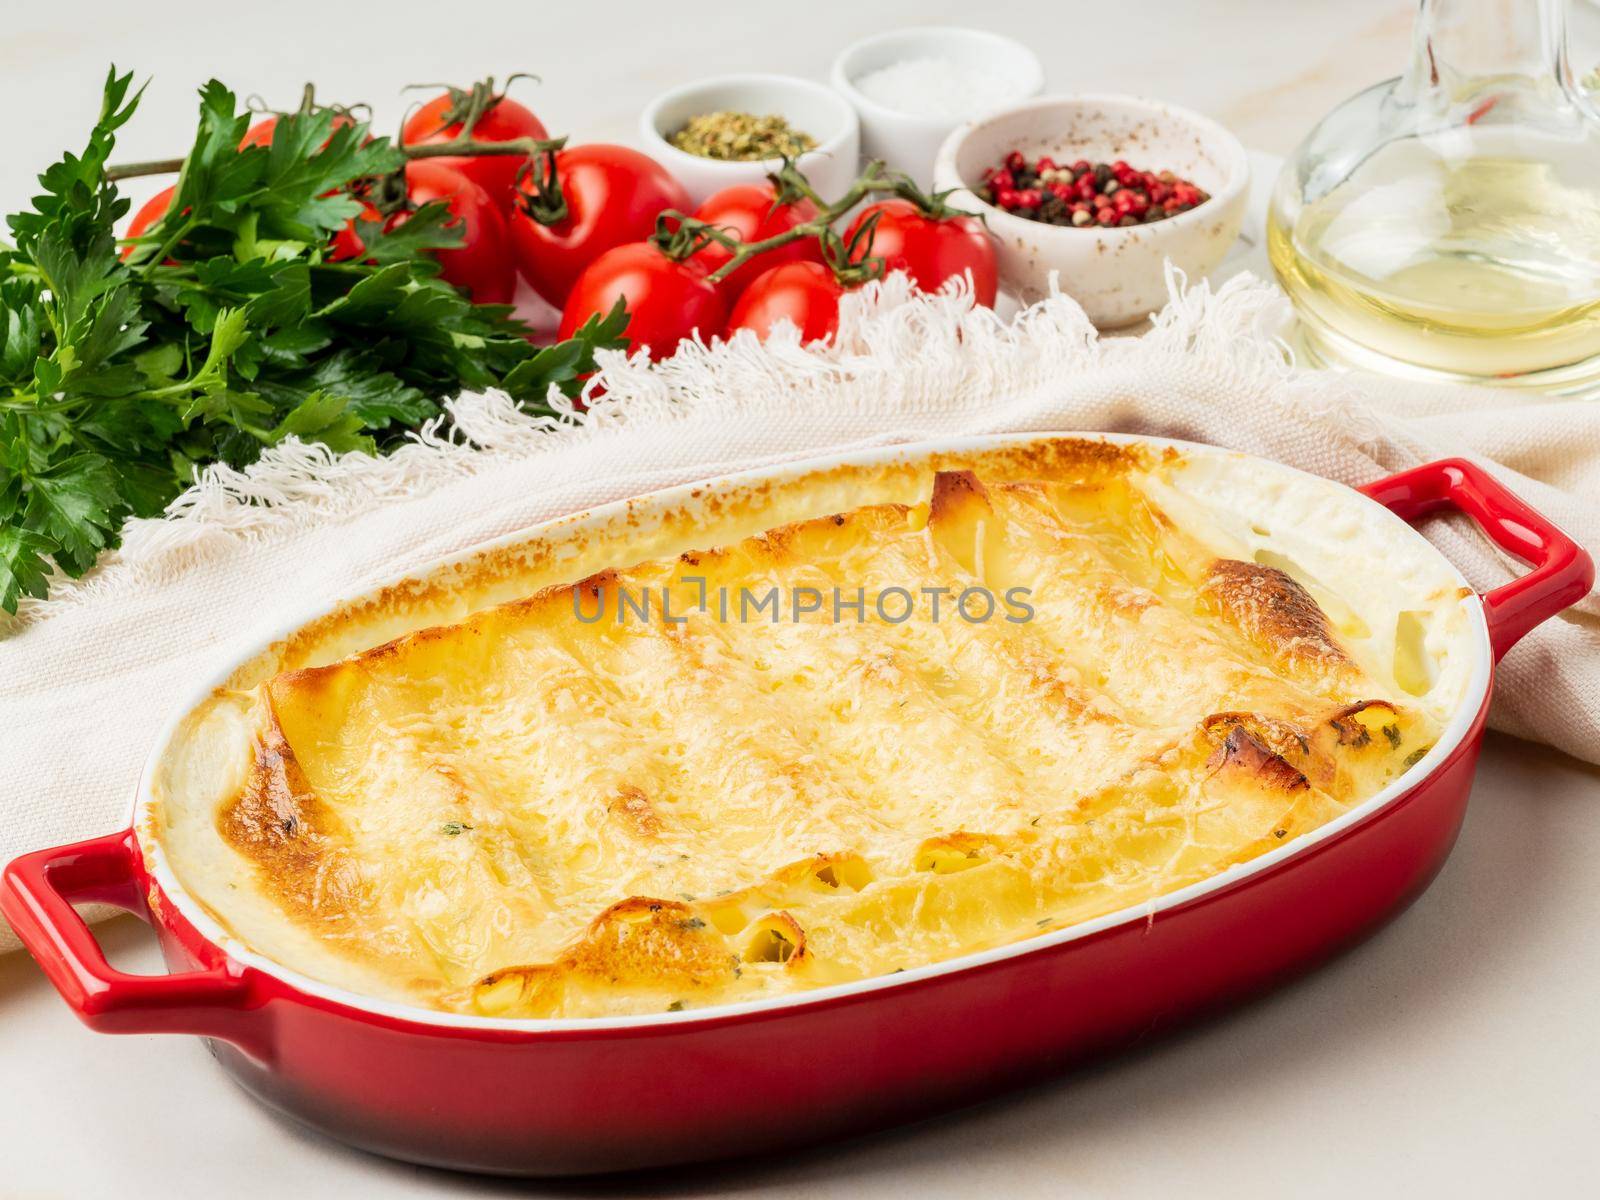 Cannelloni with filling of ricotta and parsley, baked with b chamel sauce, side view, white marble background by NataBene